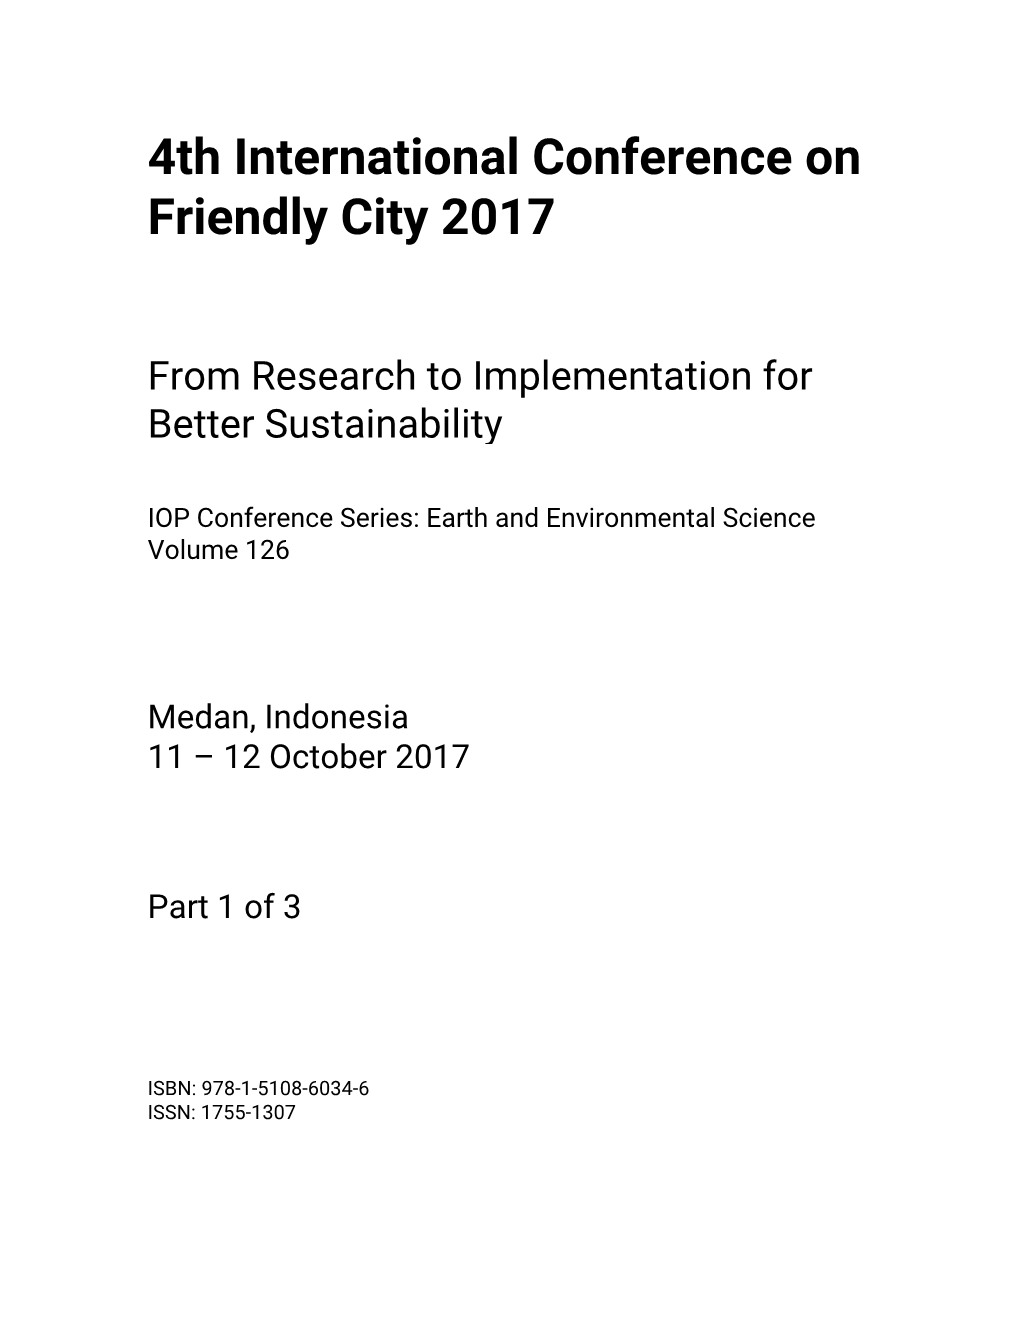 4Th International Conference on Friendly City 2017